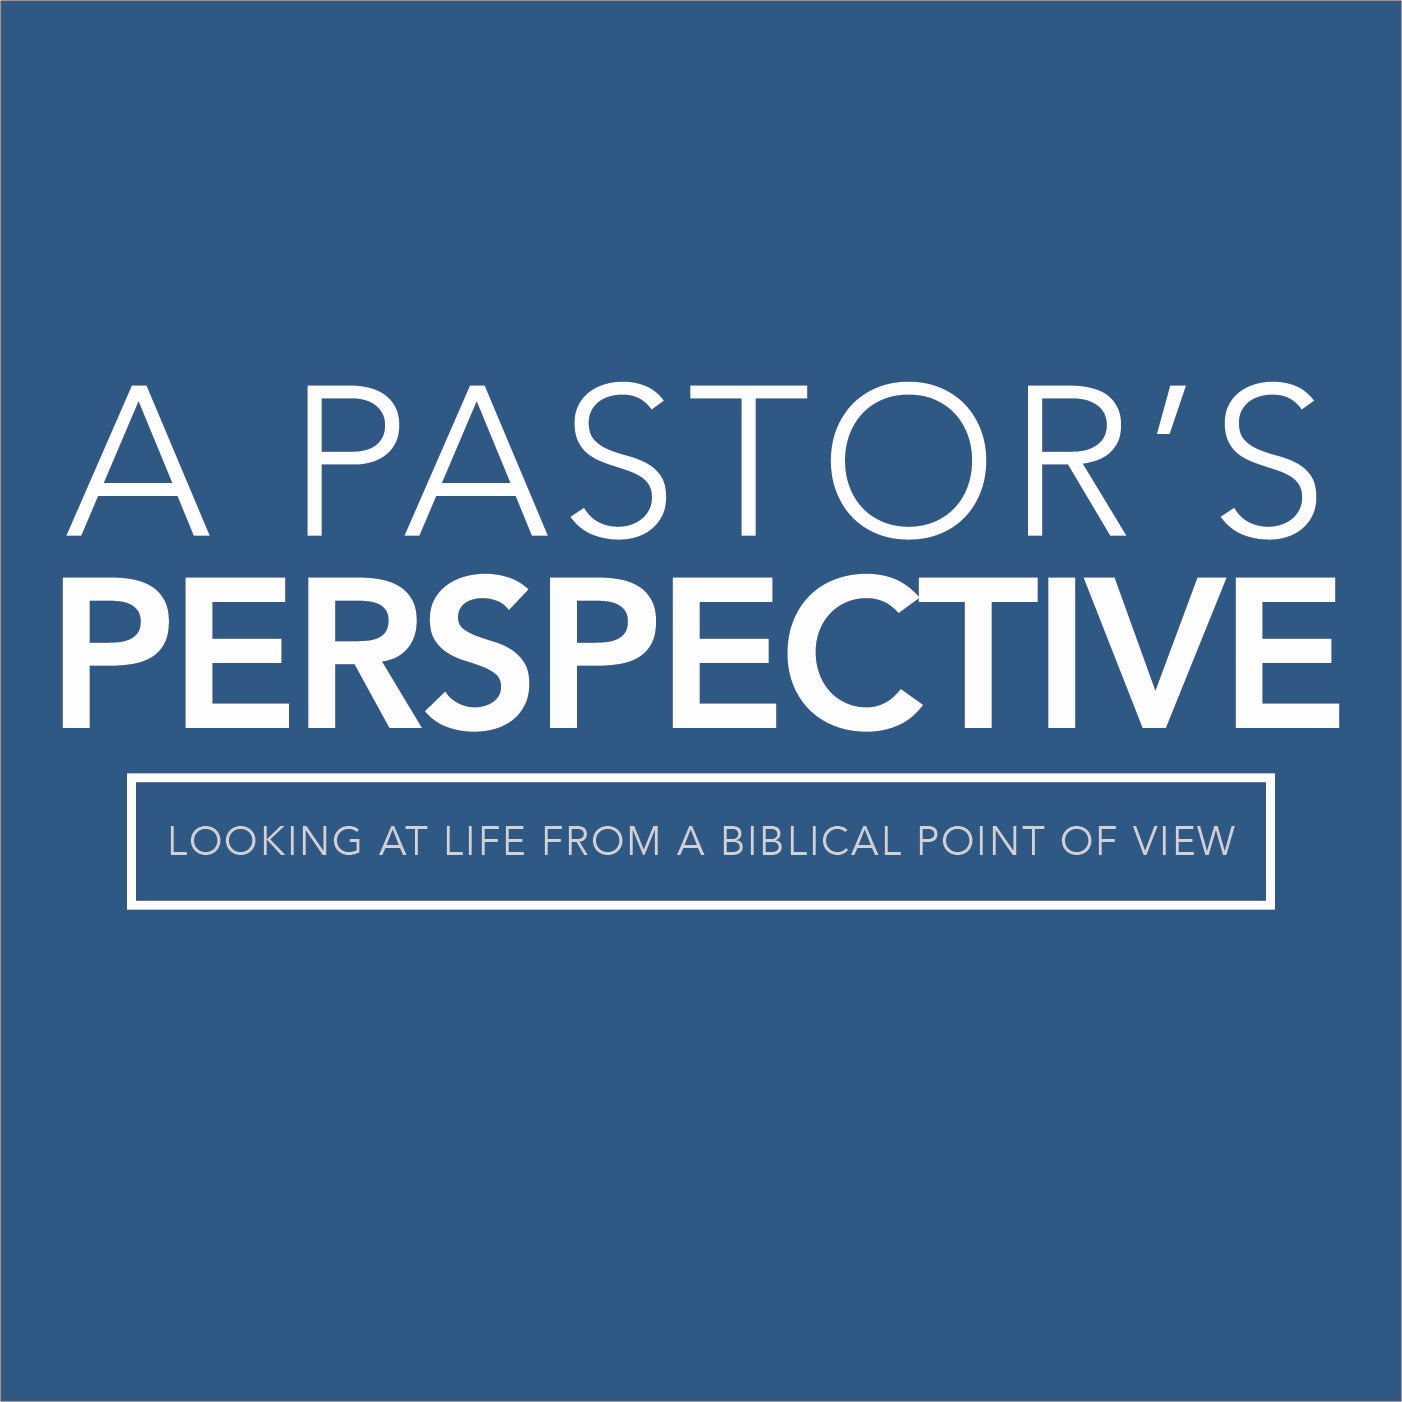 A Pastor's Perspective